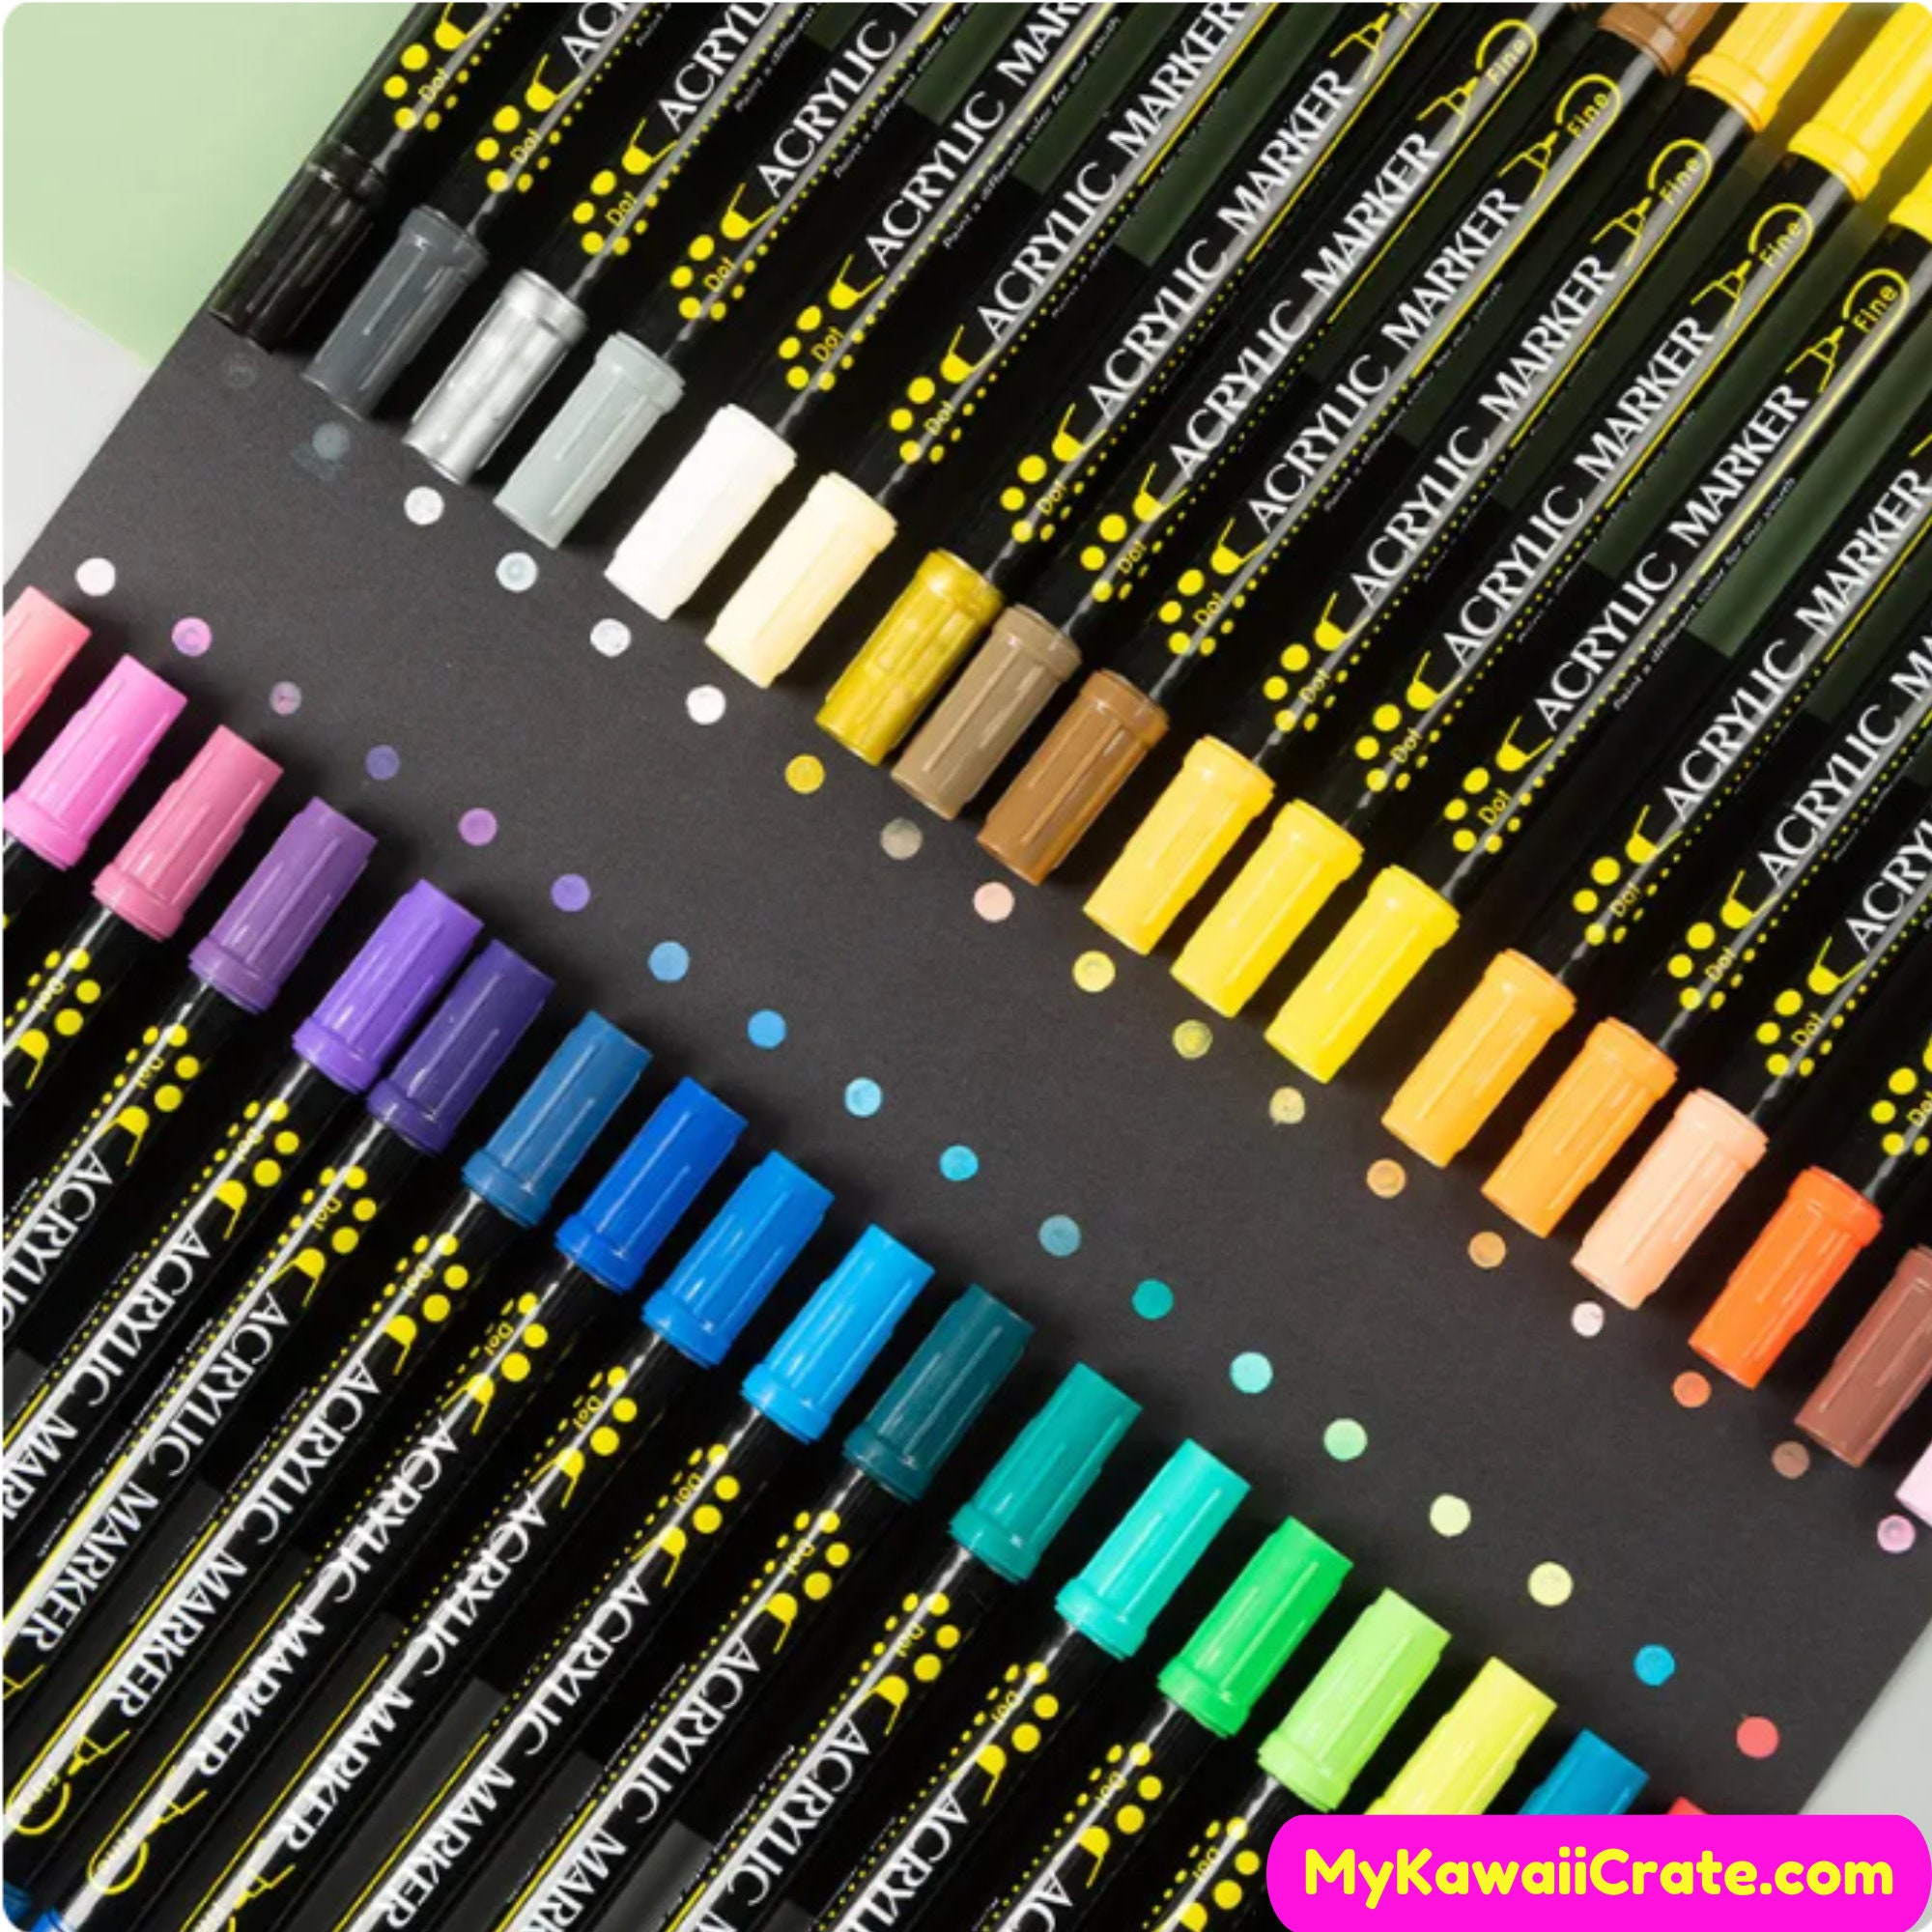 PINTAR Black Acrylic Paint Markers - Black Paint Pen as Guestbook Markers  and Calligraphy Markers - Acrylic Markers for Writing on Canvas, Rock